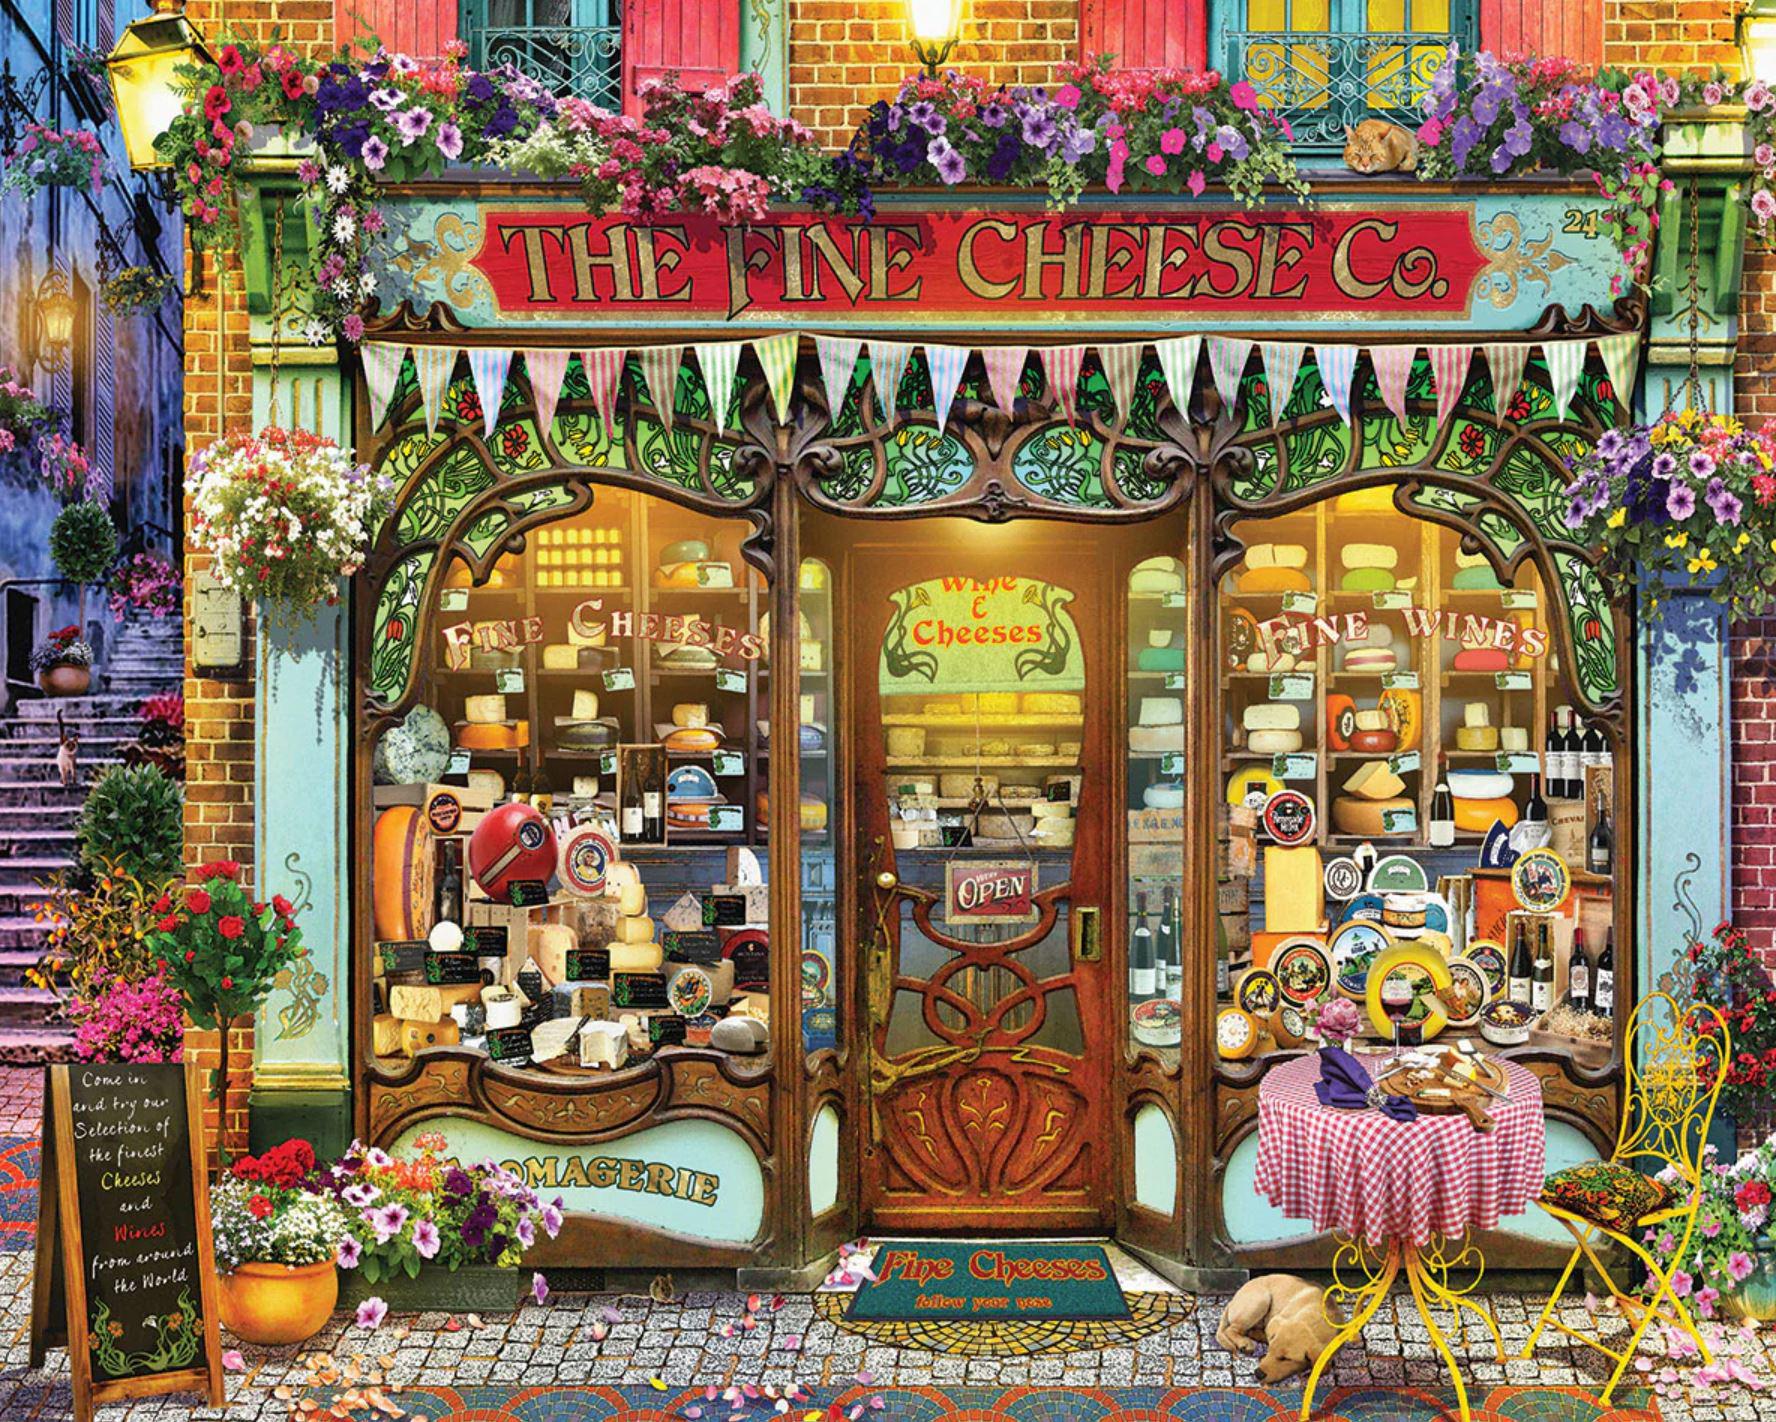 White Mountain Jigsaw Puzzle | Wine & Cheese Shop 1000 Piece